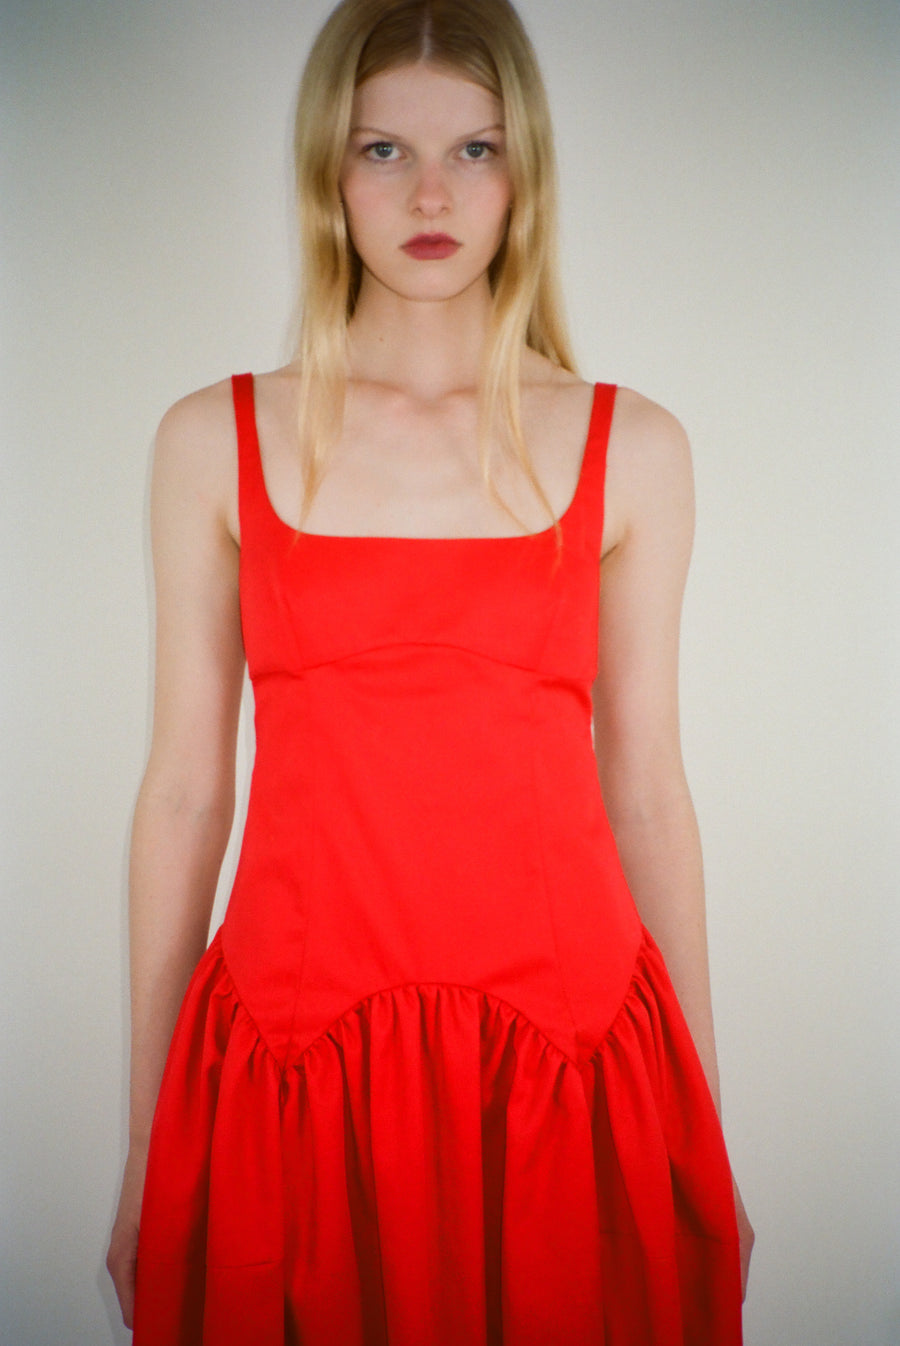 Sleeveless midi length dress in red with ties at back on model